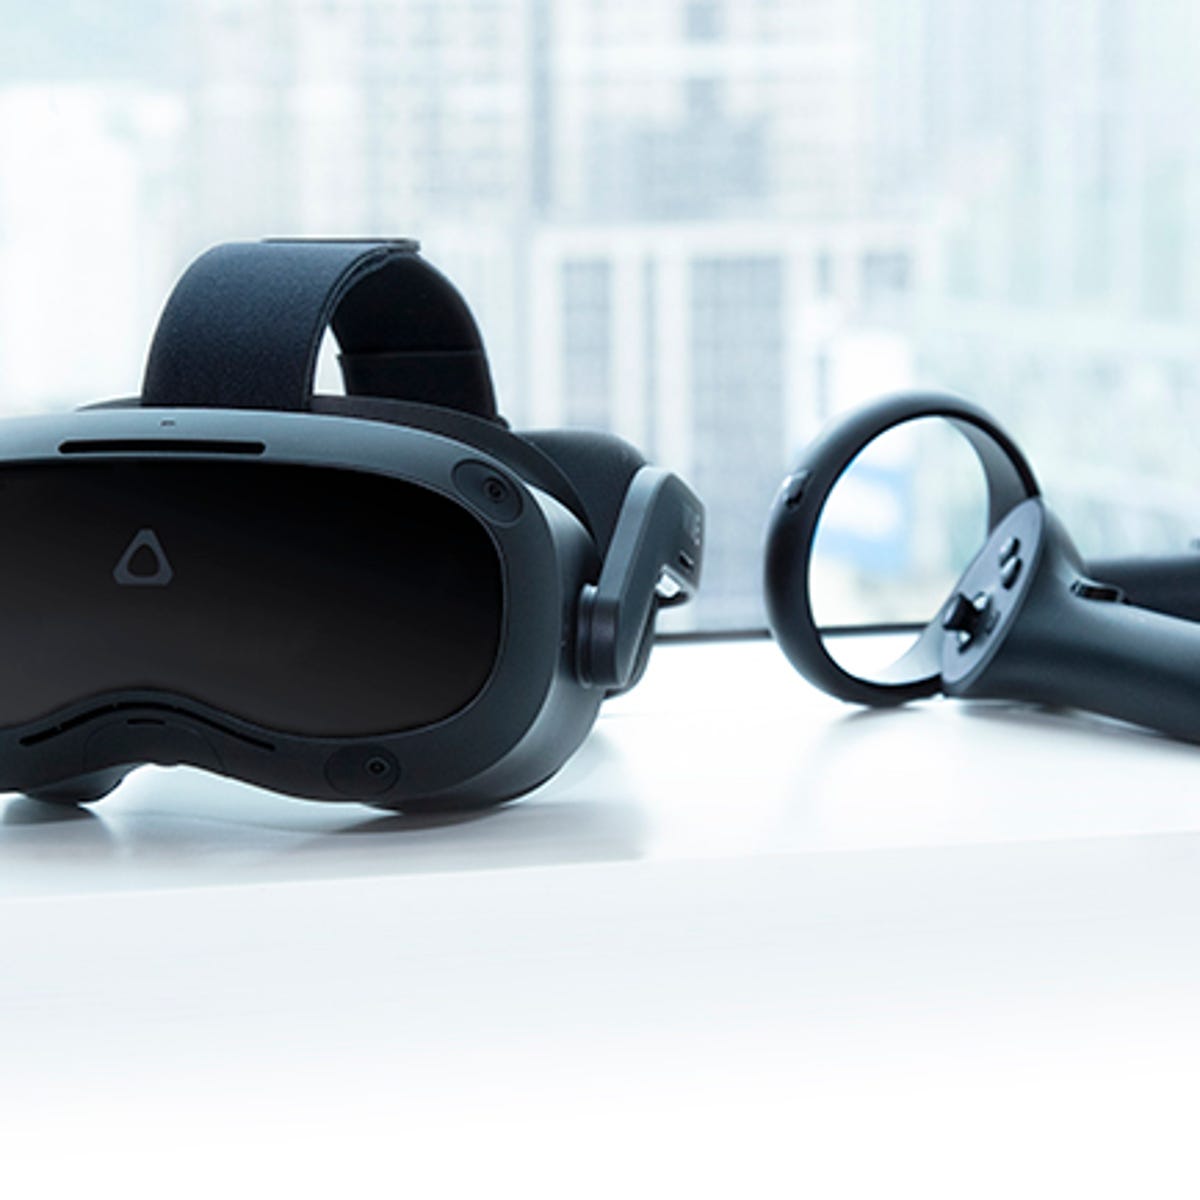 análisis raro sinsonte HTC Vive Focus 3 review: A premium standalone VR headset for business |  ZDNET